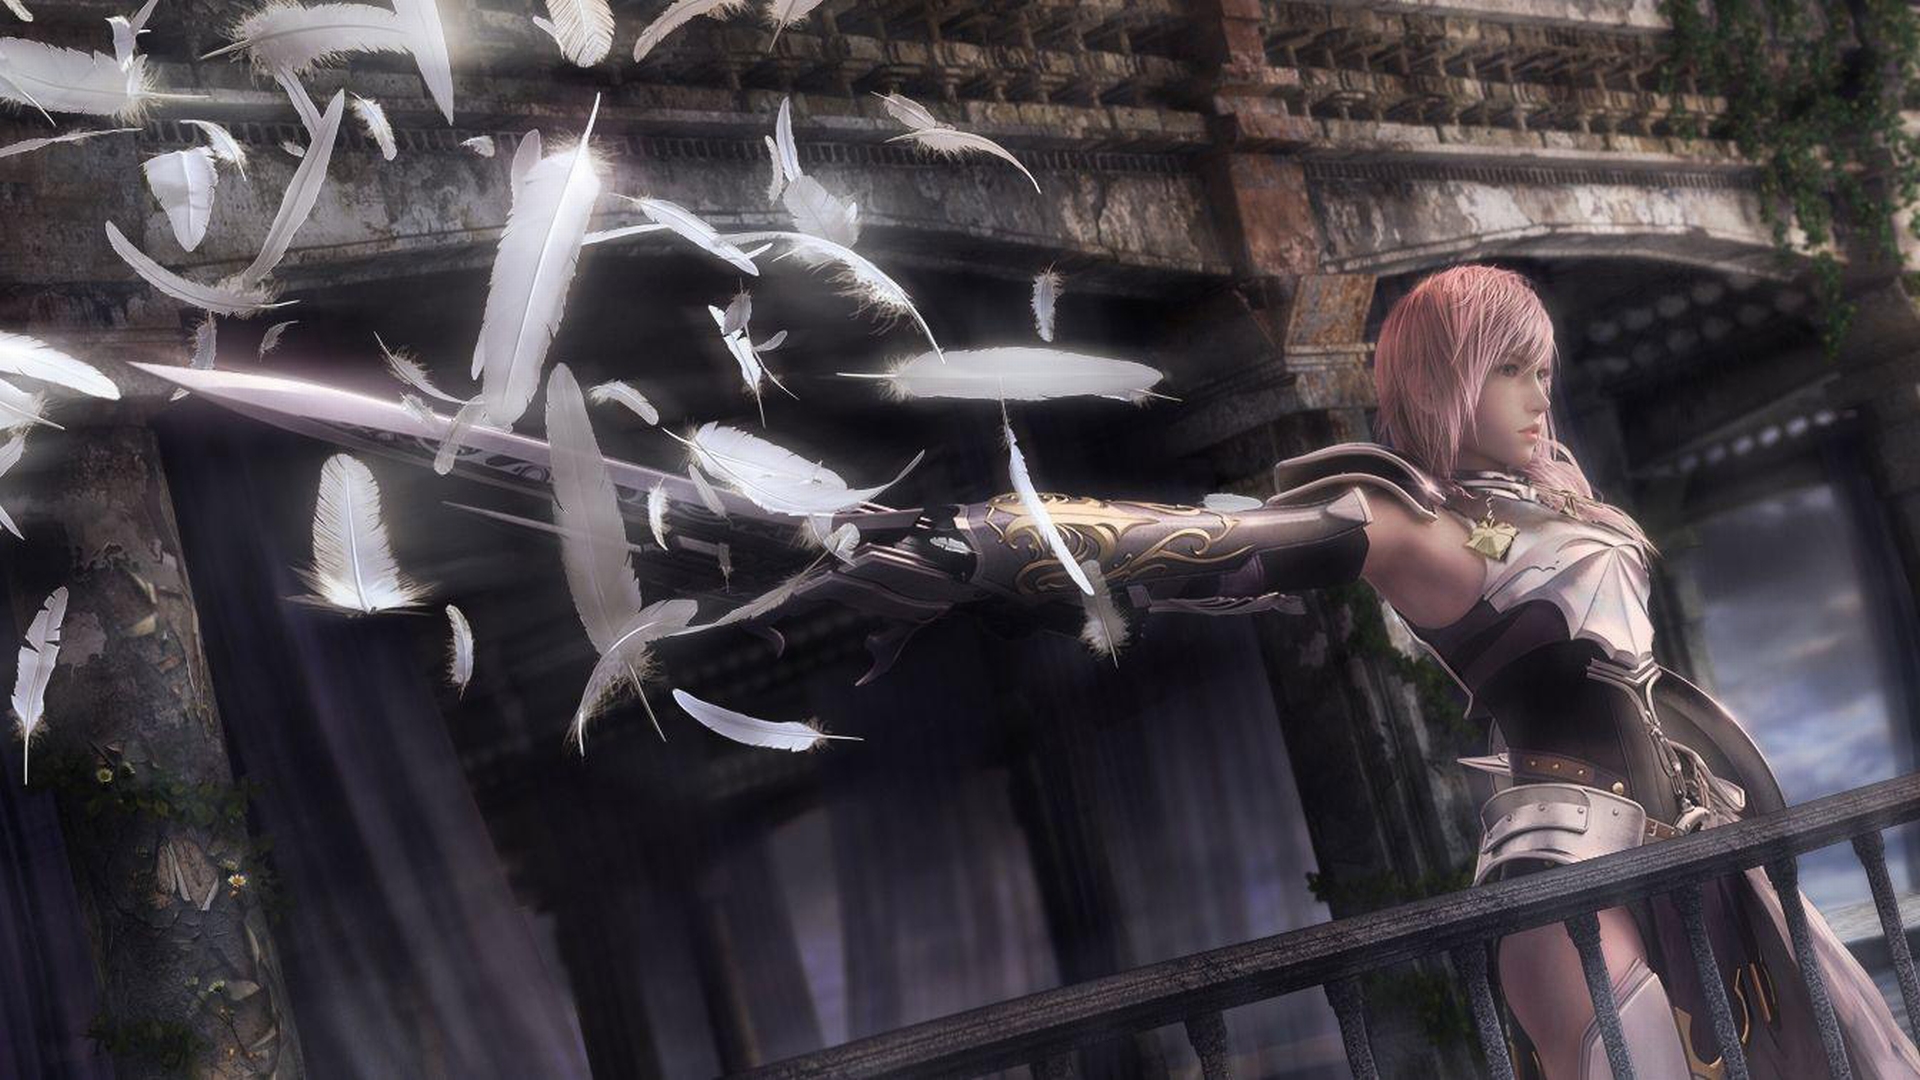 Video Game Final Fantasy XIII-2 HD Wallpaper | Background Image